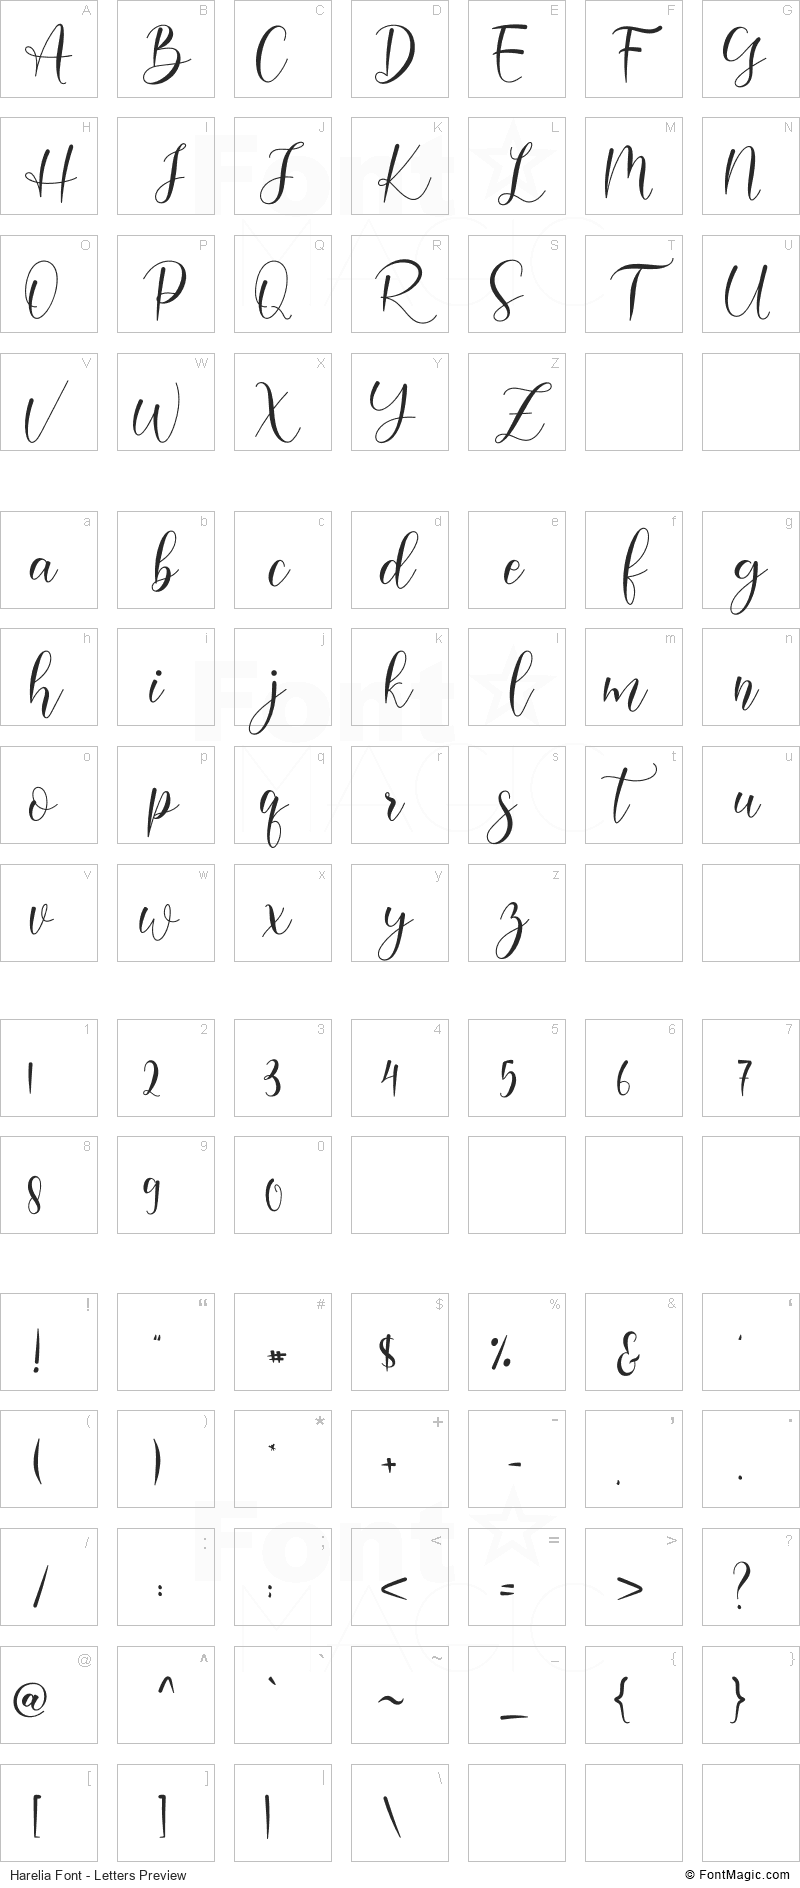 Harelia Font - All Latters Preview Chart